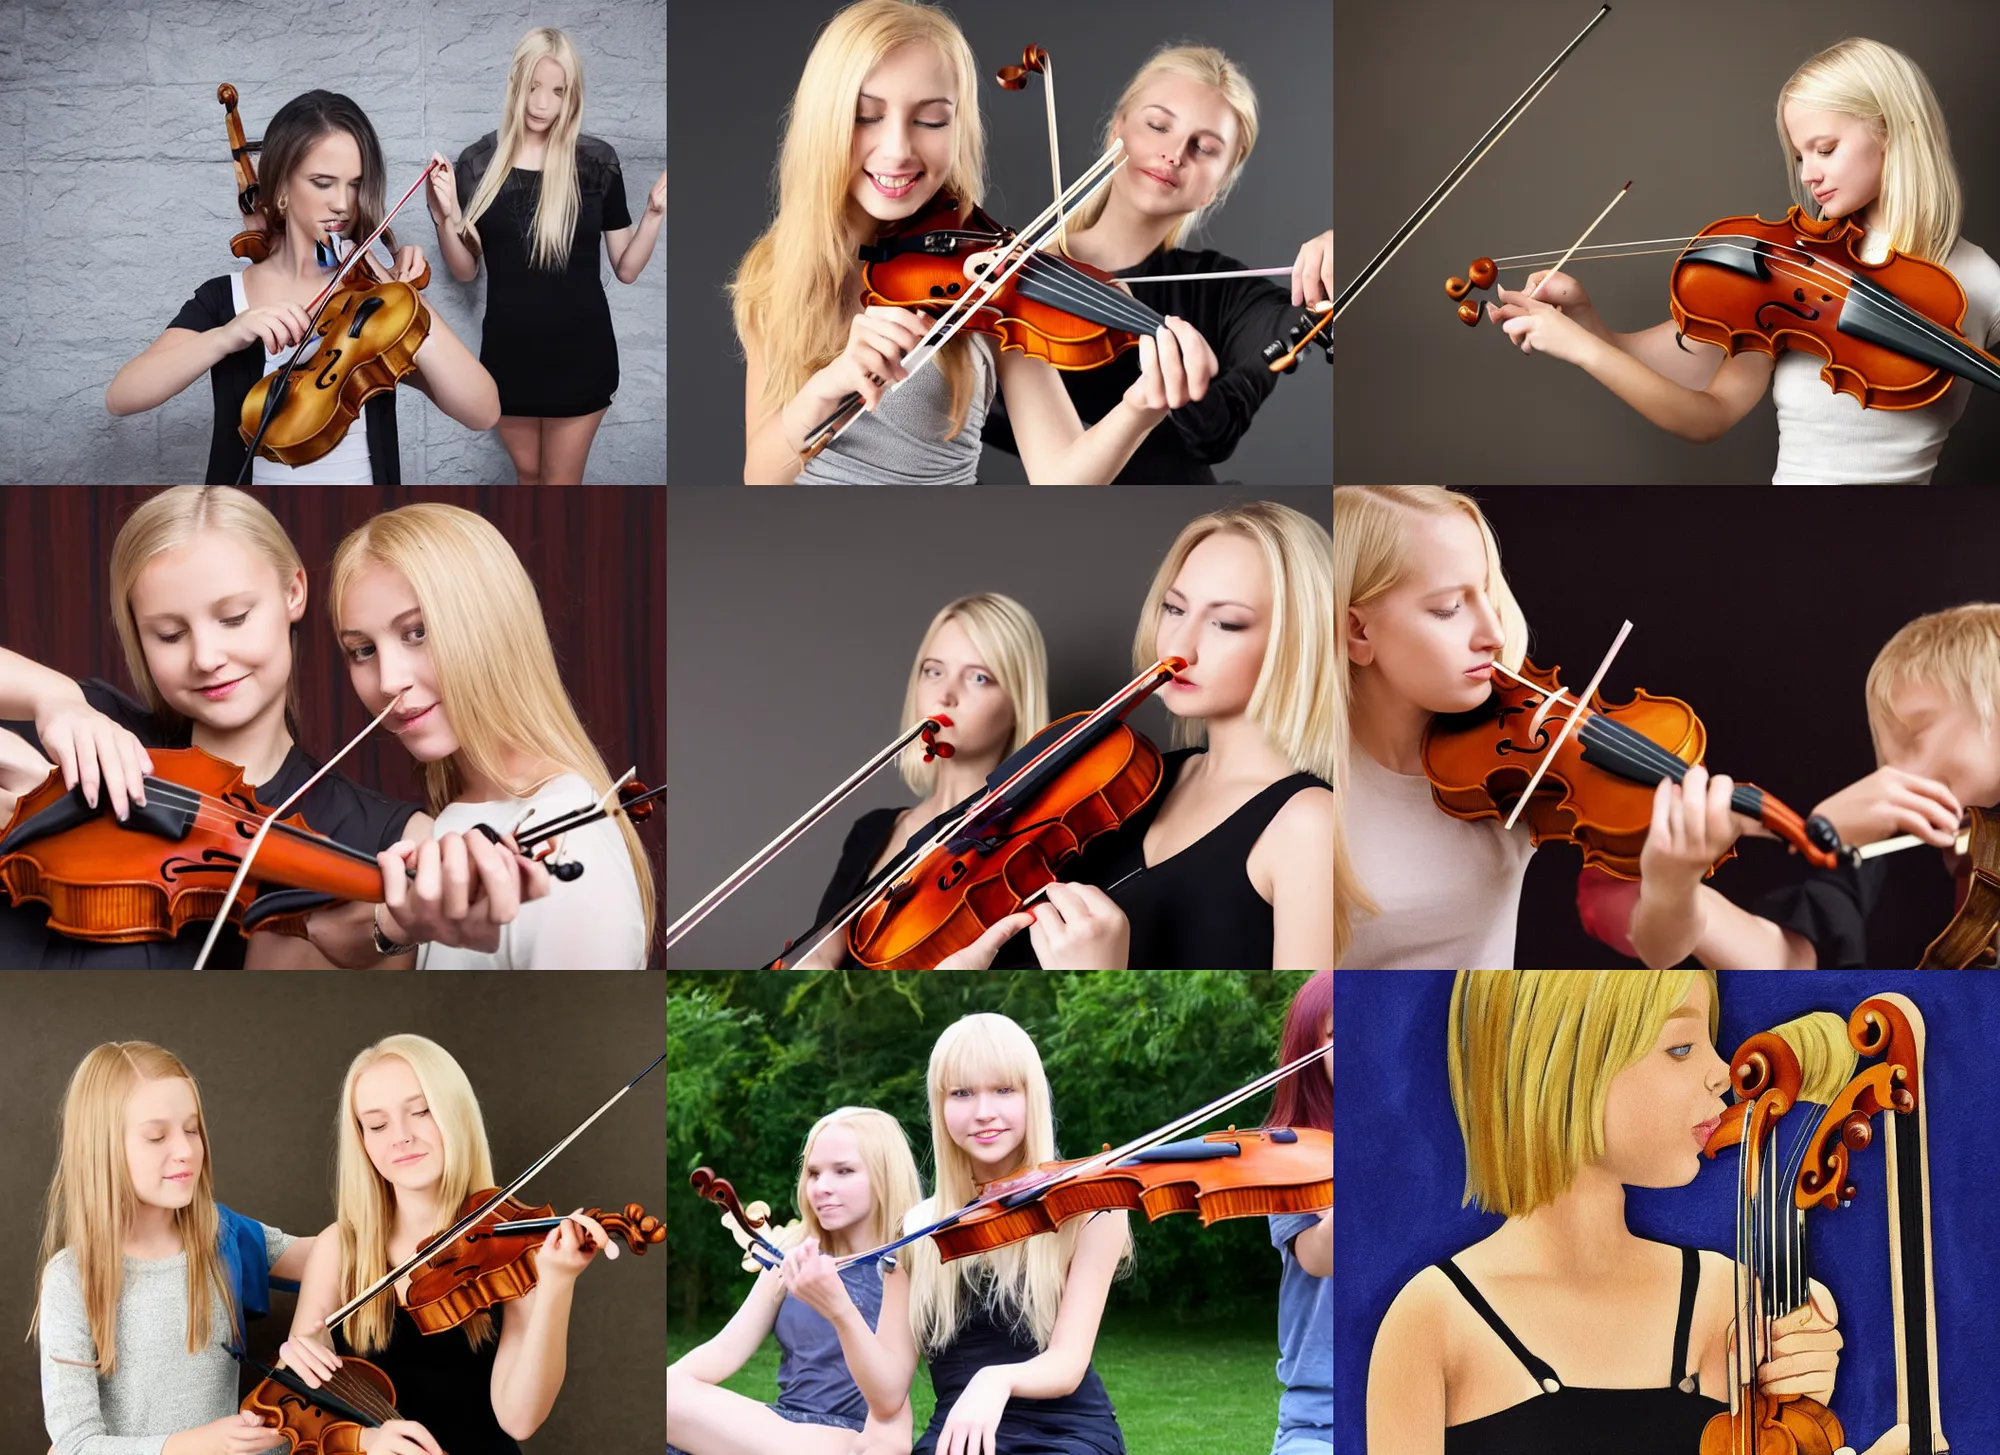 Prompt: blonde girl cuts the strings on the violin